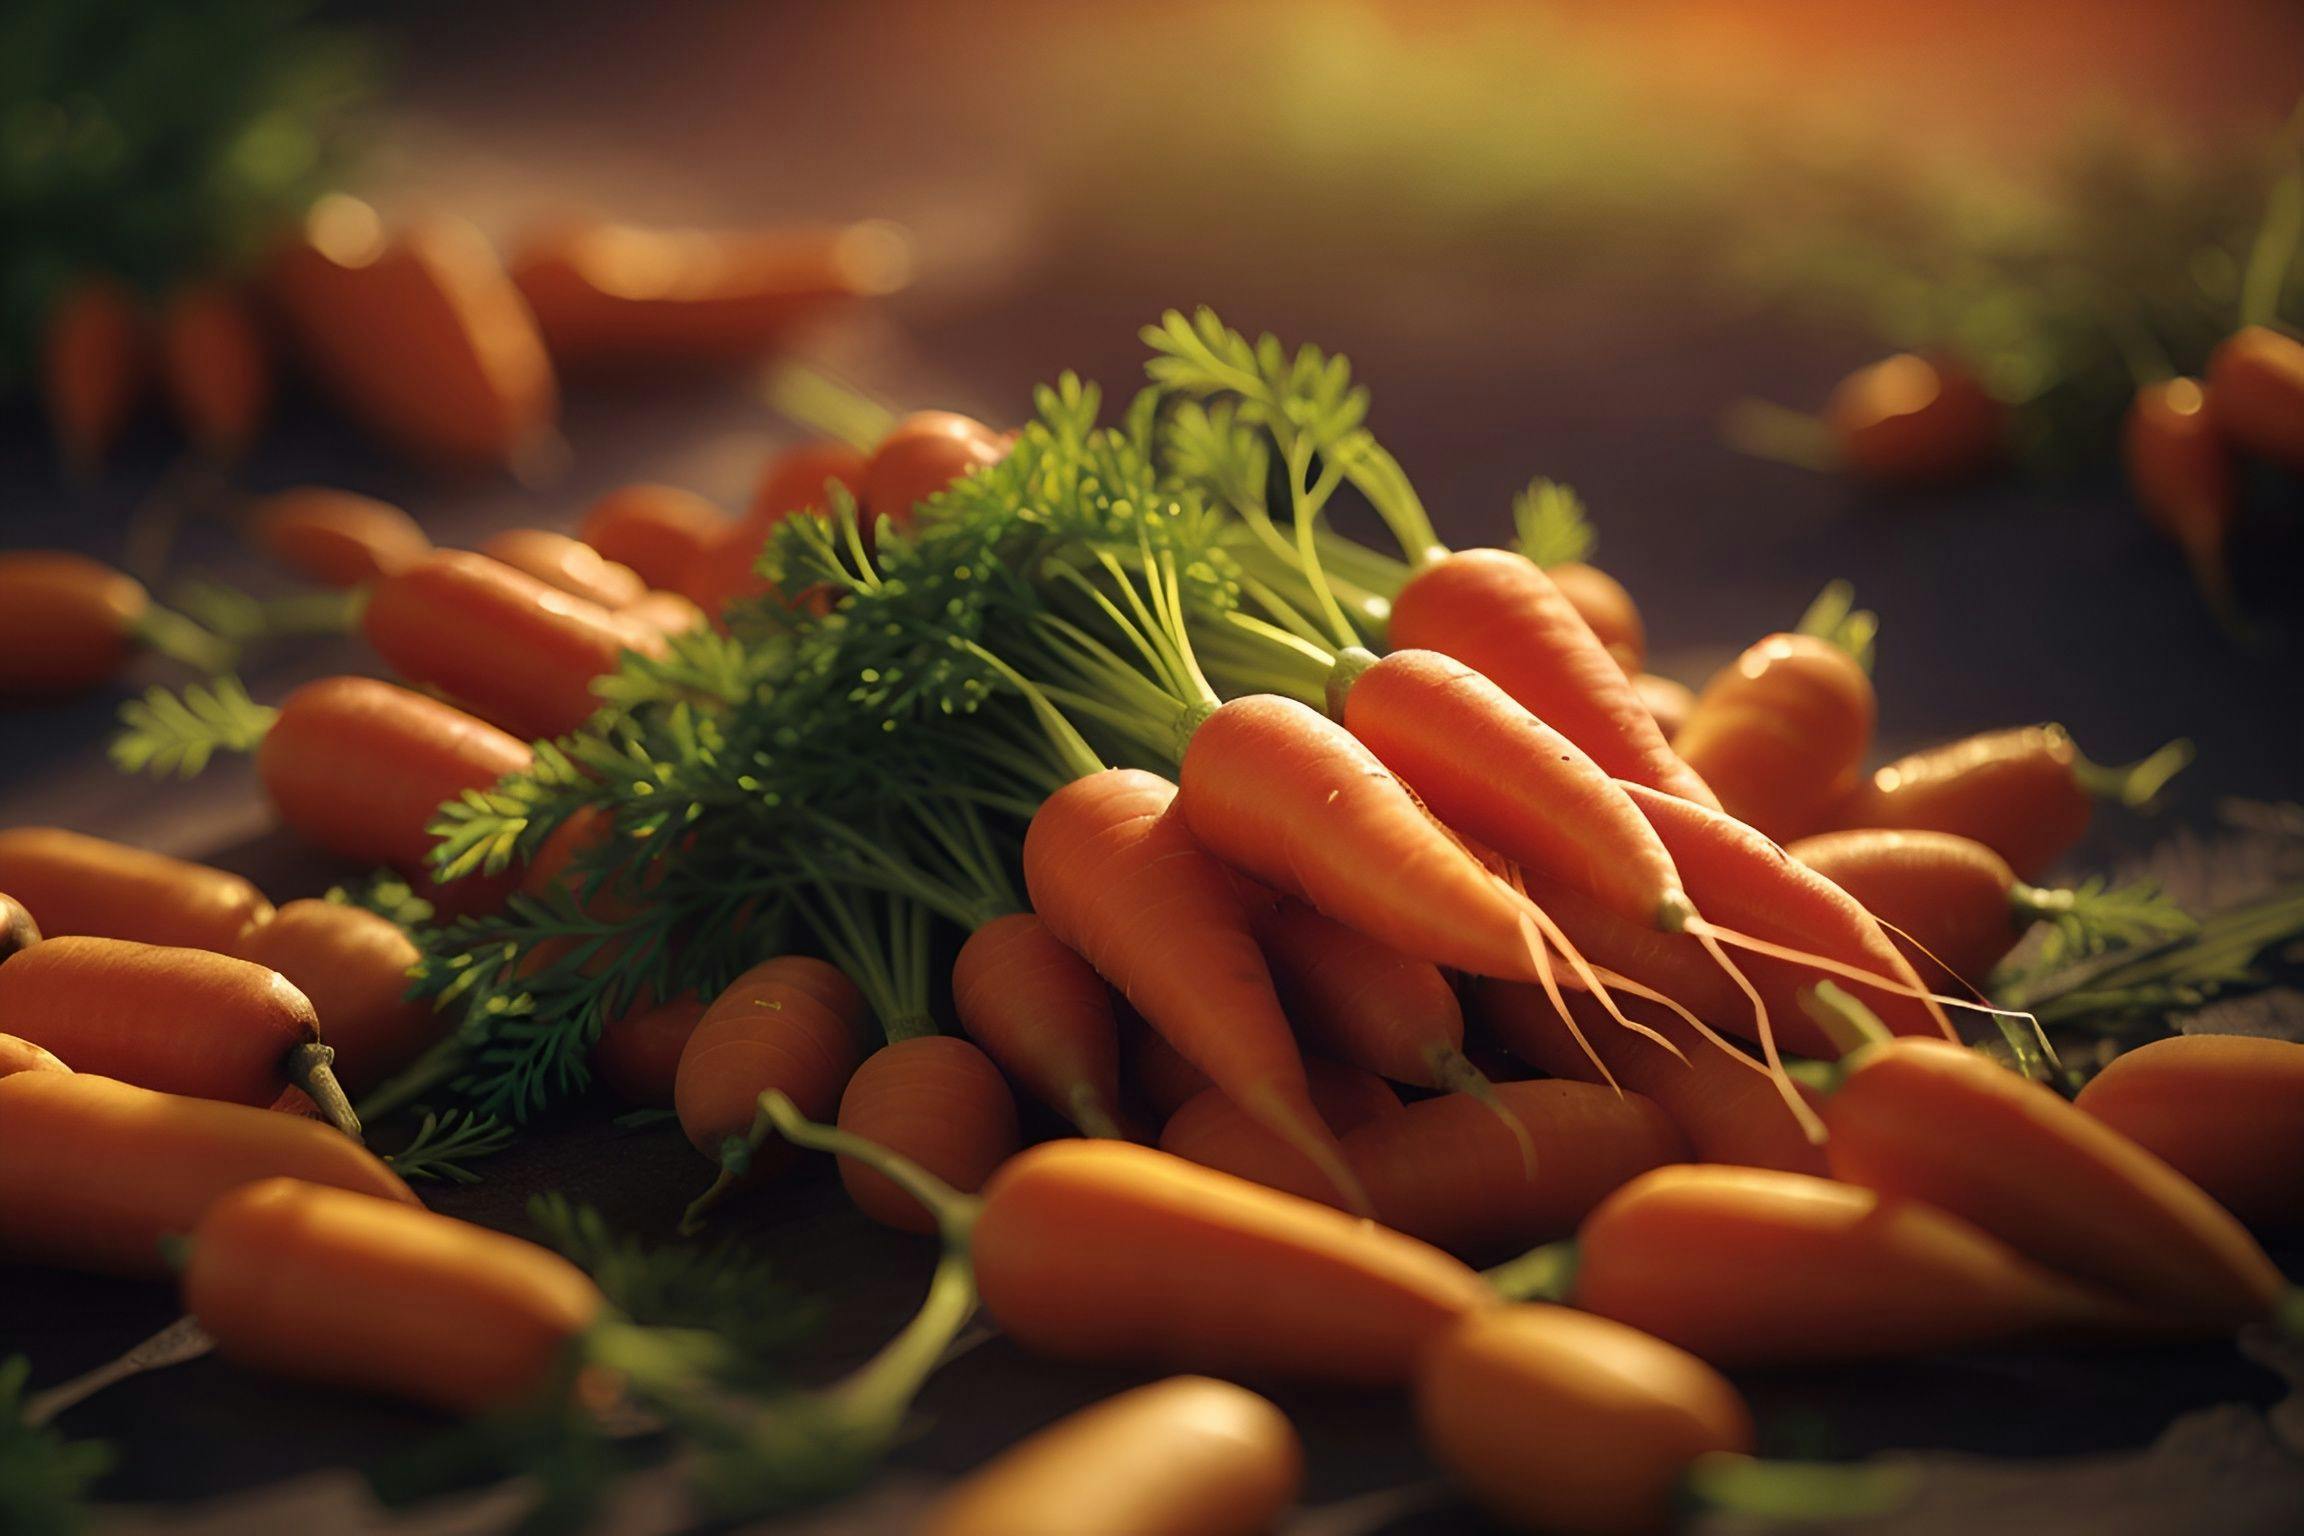 Baby Carrots: Orange is the New Snack cover image